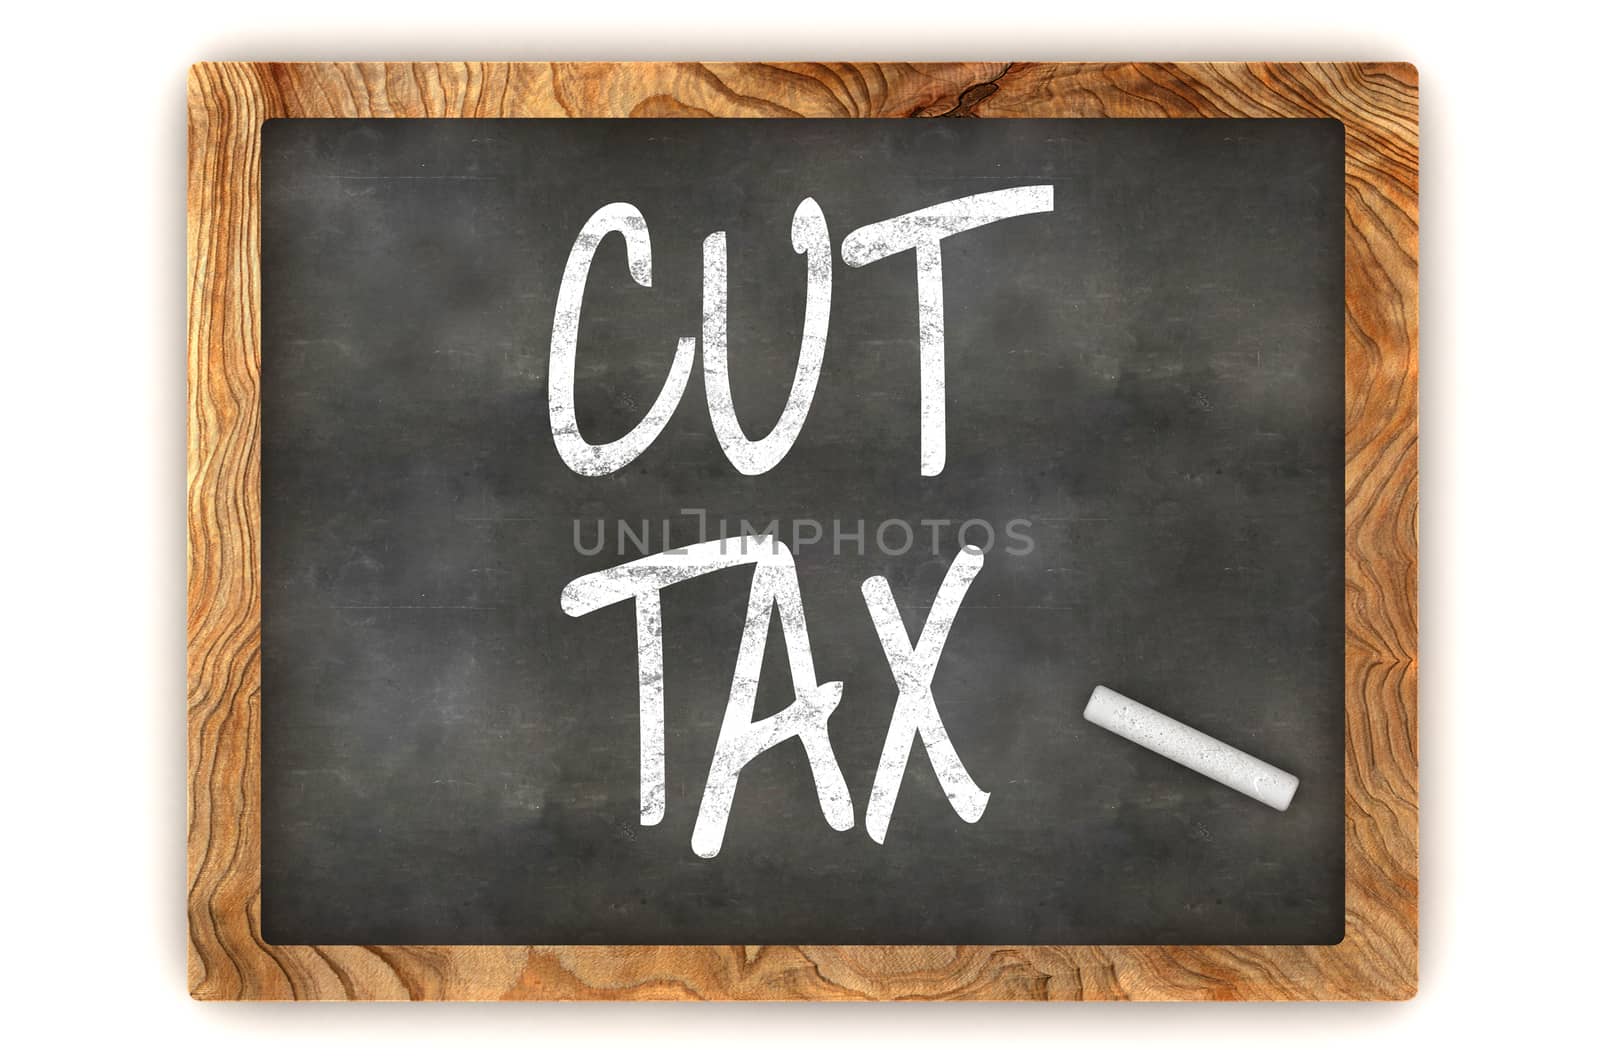 A Colourful 3d Rendered Blackboard Illustration Showing 'Cut Tax'